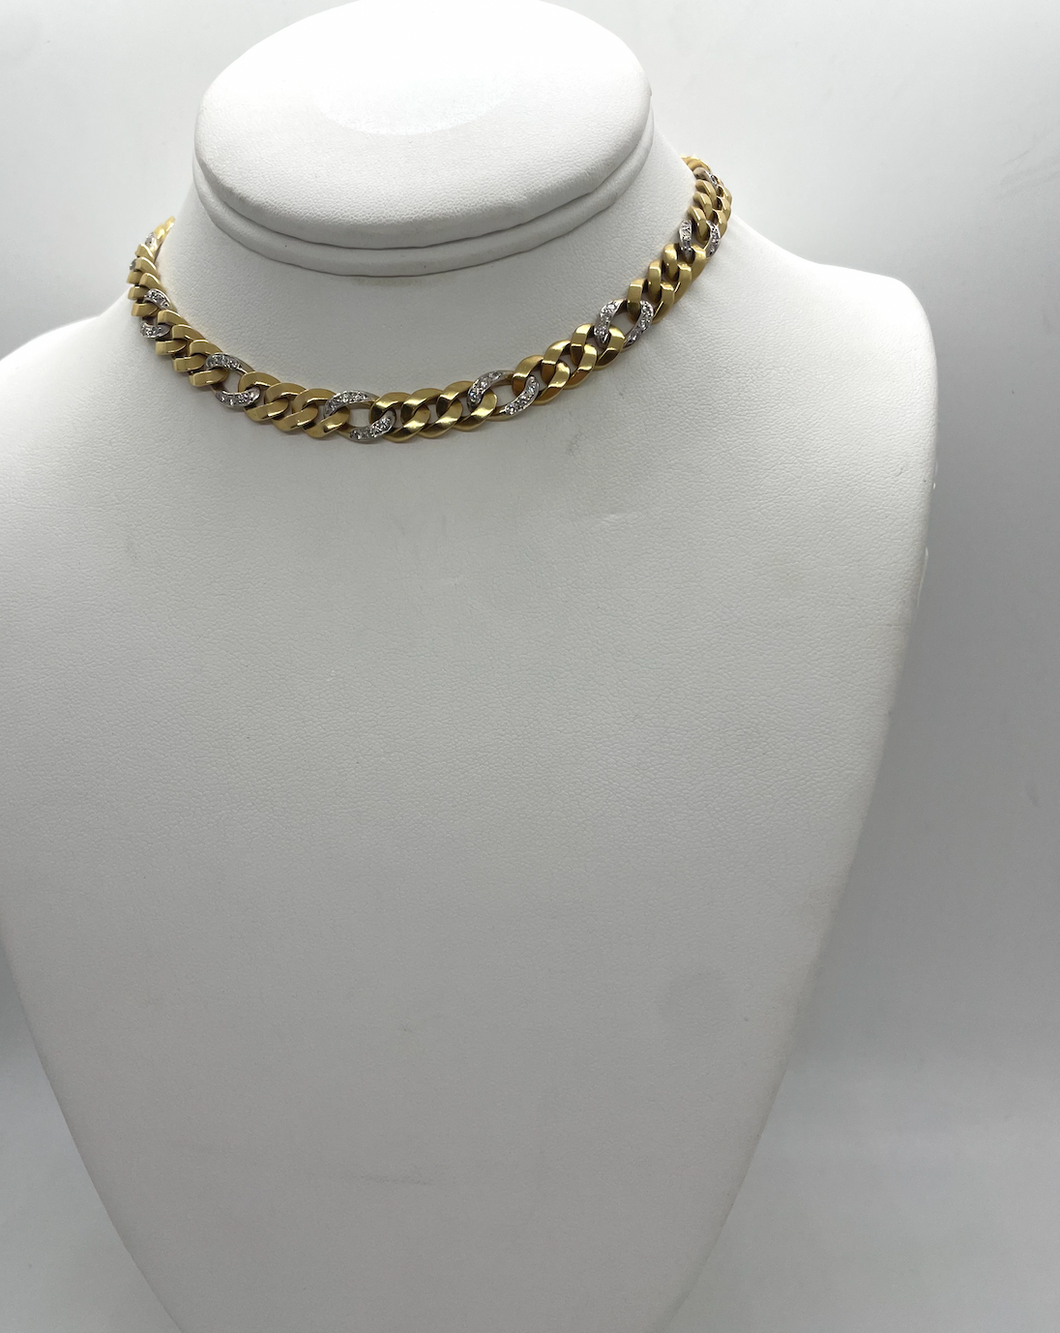 Cuban Chain Necklace with Pave Diamonds